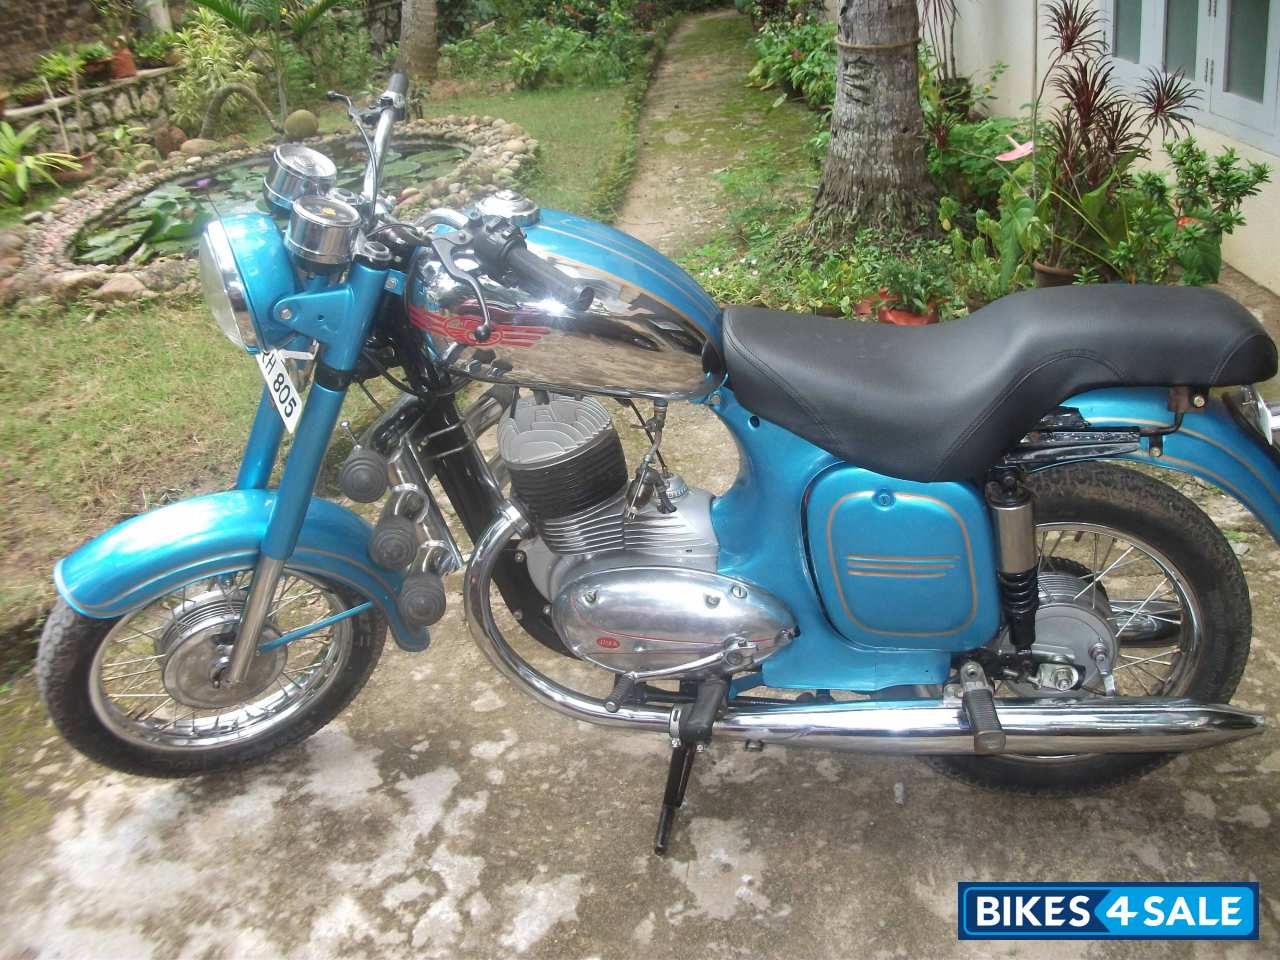 Used 1965 Model Ideal Jawa Jawa For Sale In Trivandrum Id